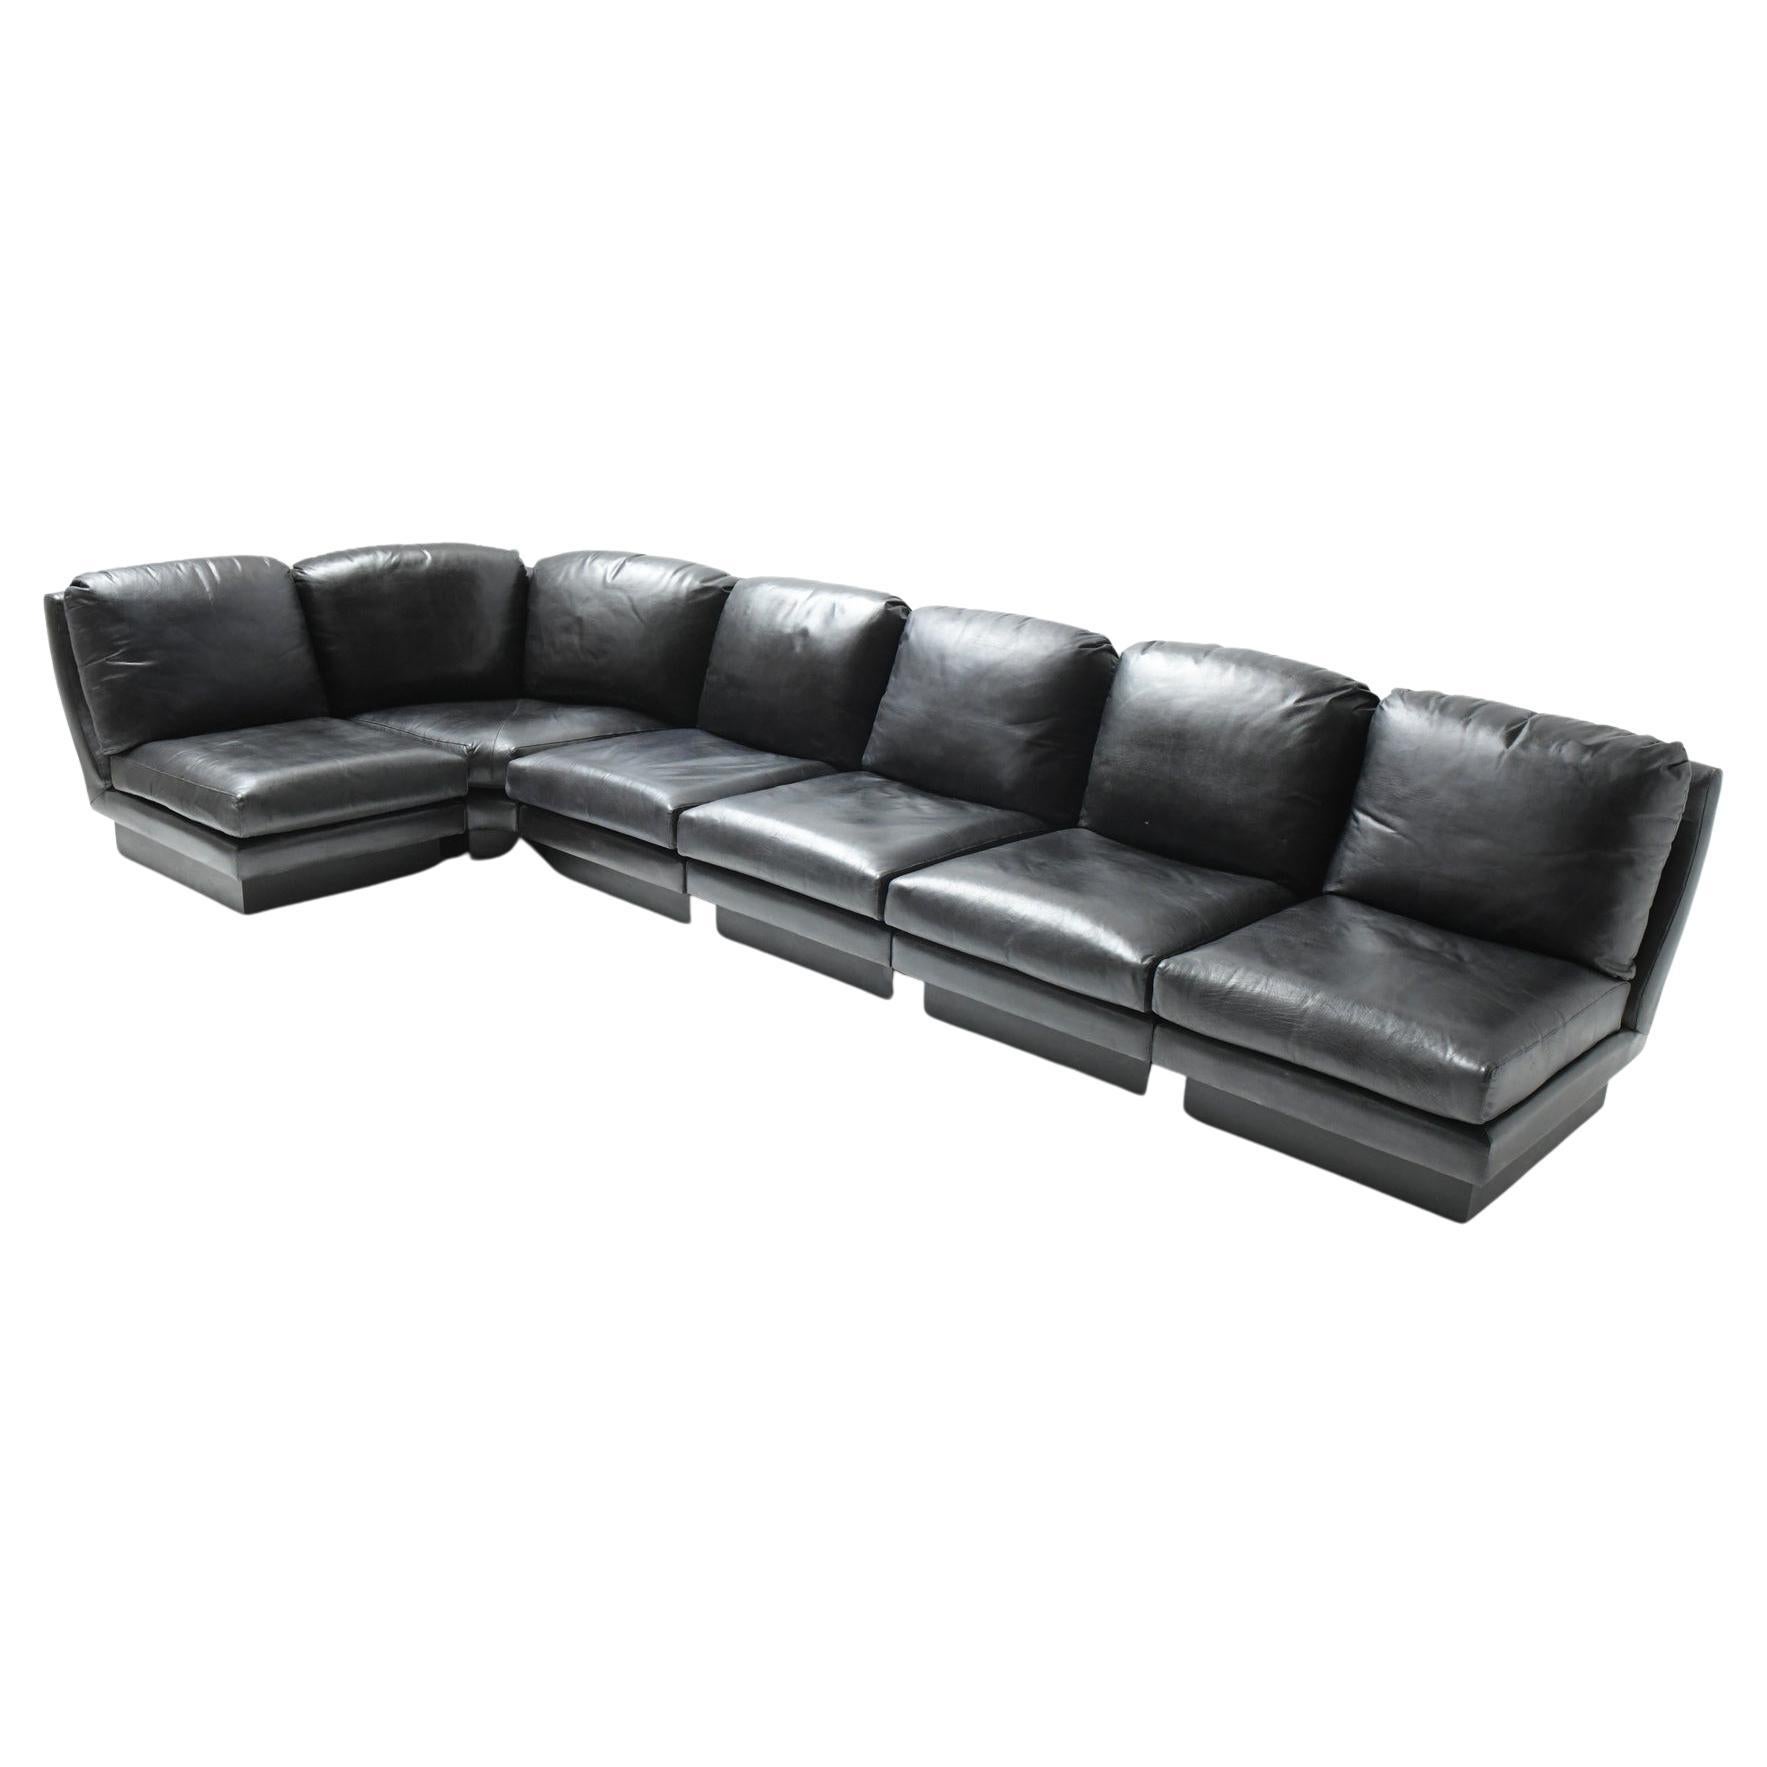 Rare Vintage Super C Modular Black Leather Sofa  by Willy Rizzo Italy For Sale